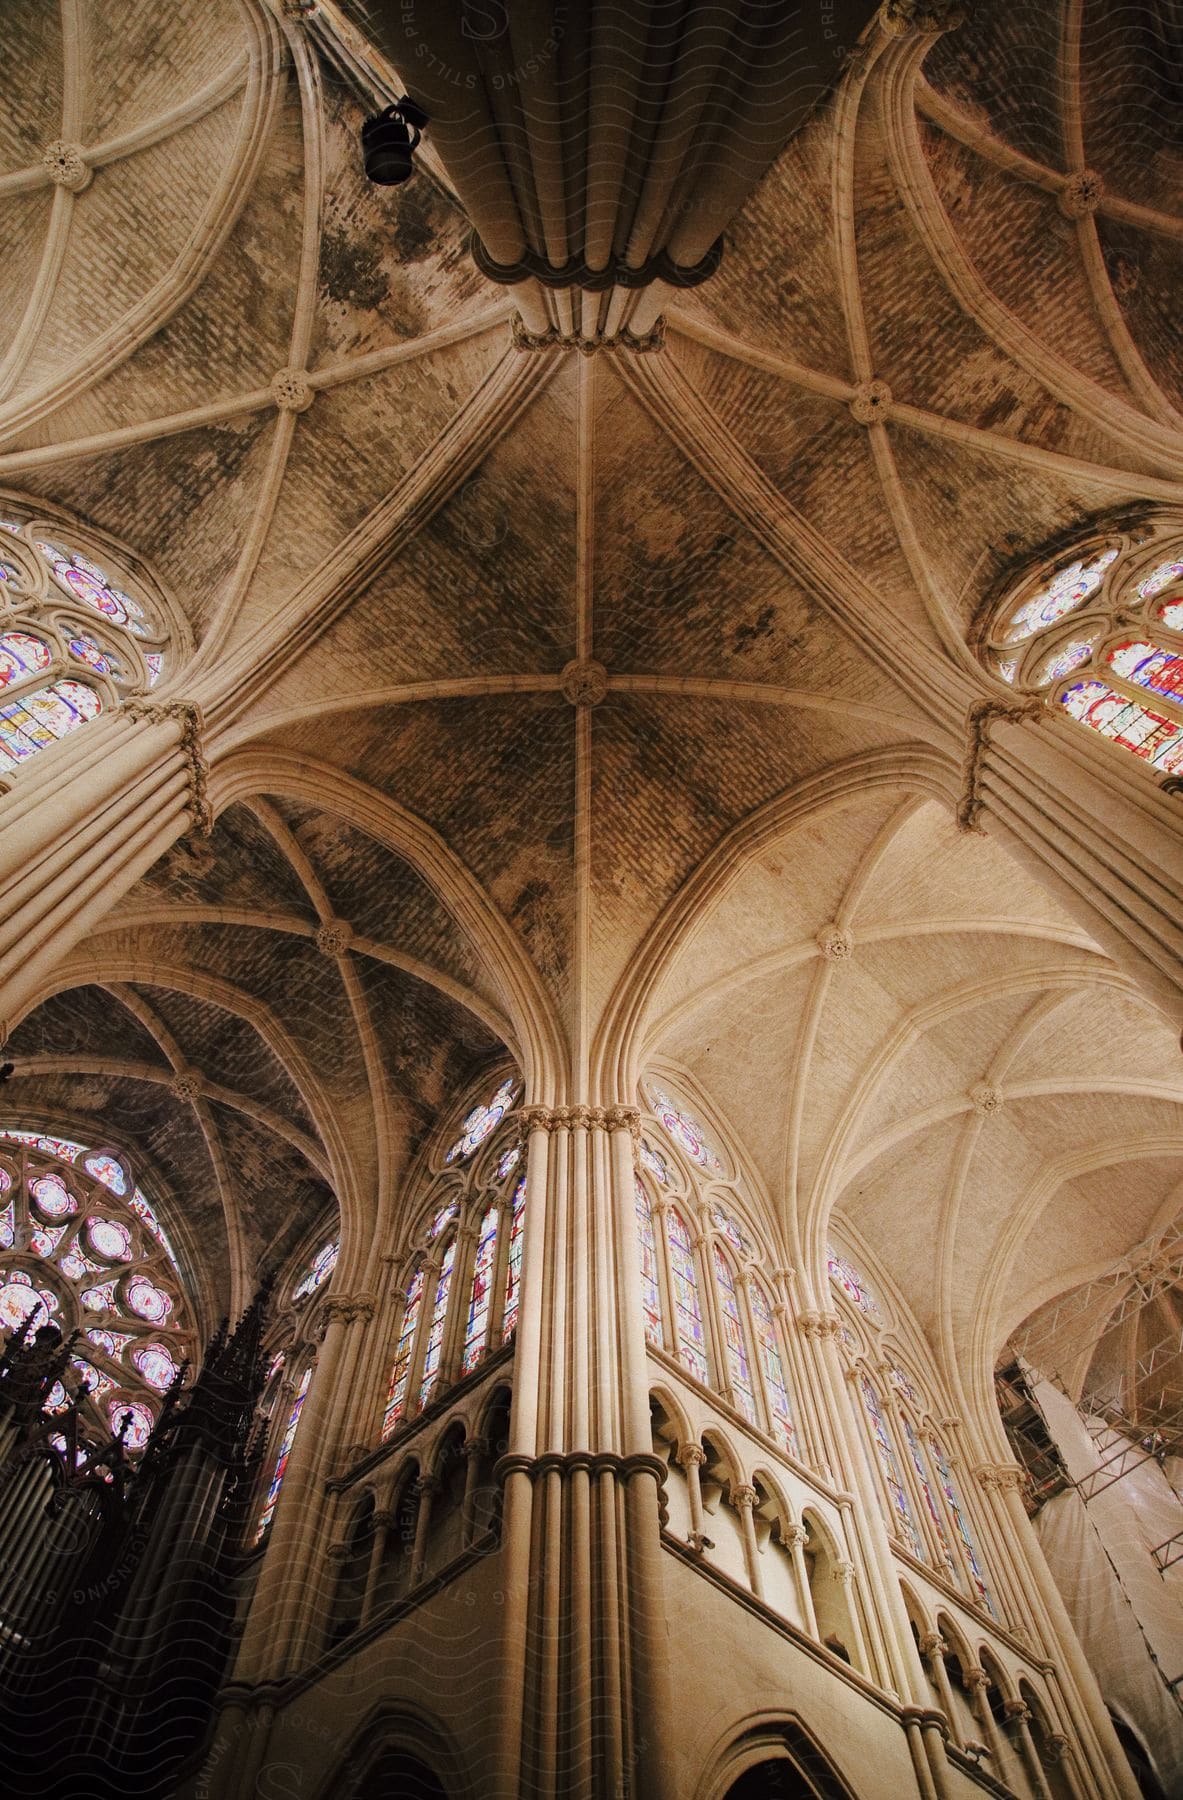 Interior Gothic Ceiling And Arches Architecture Of An Ancient Cathedral